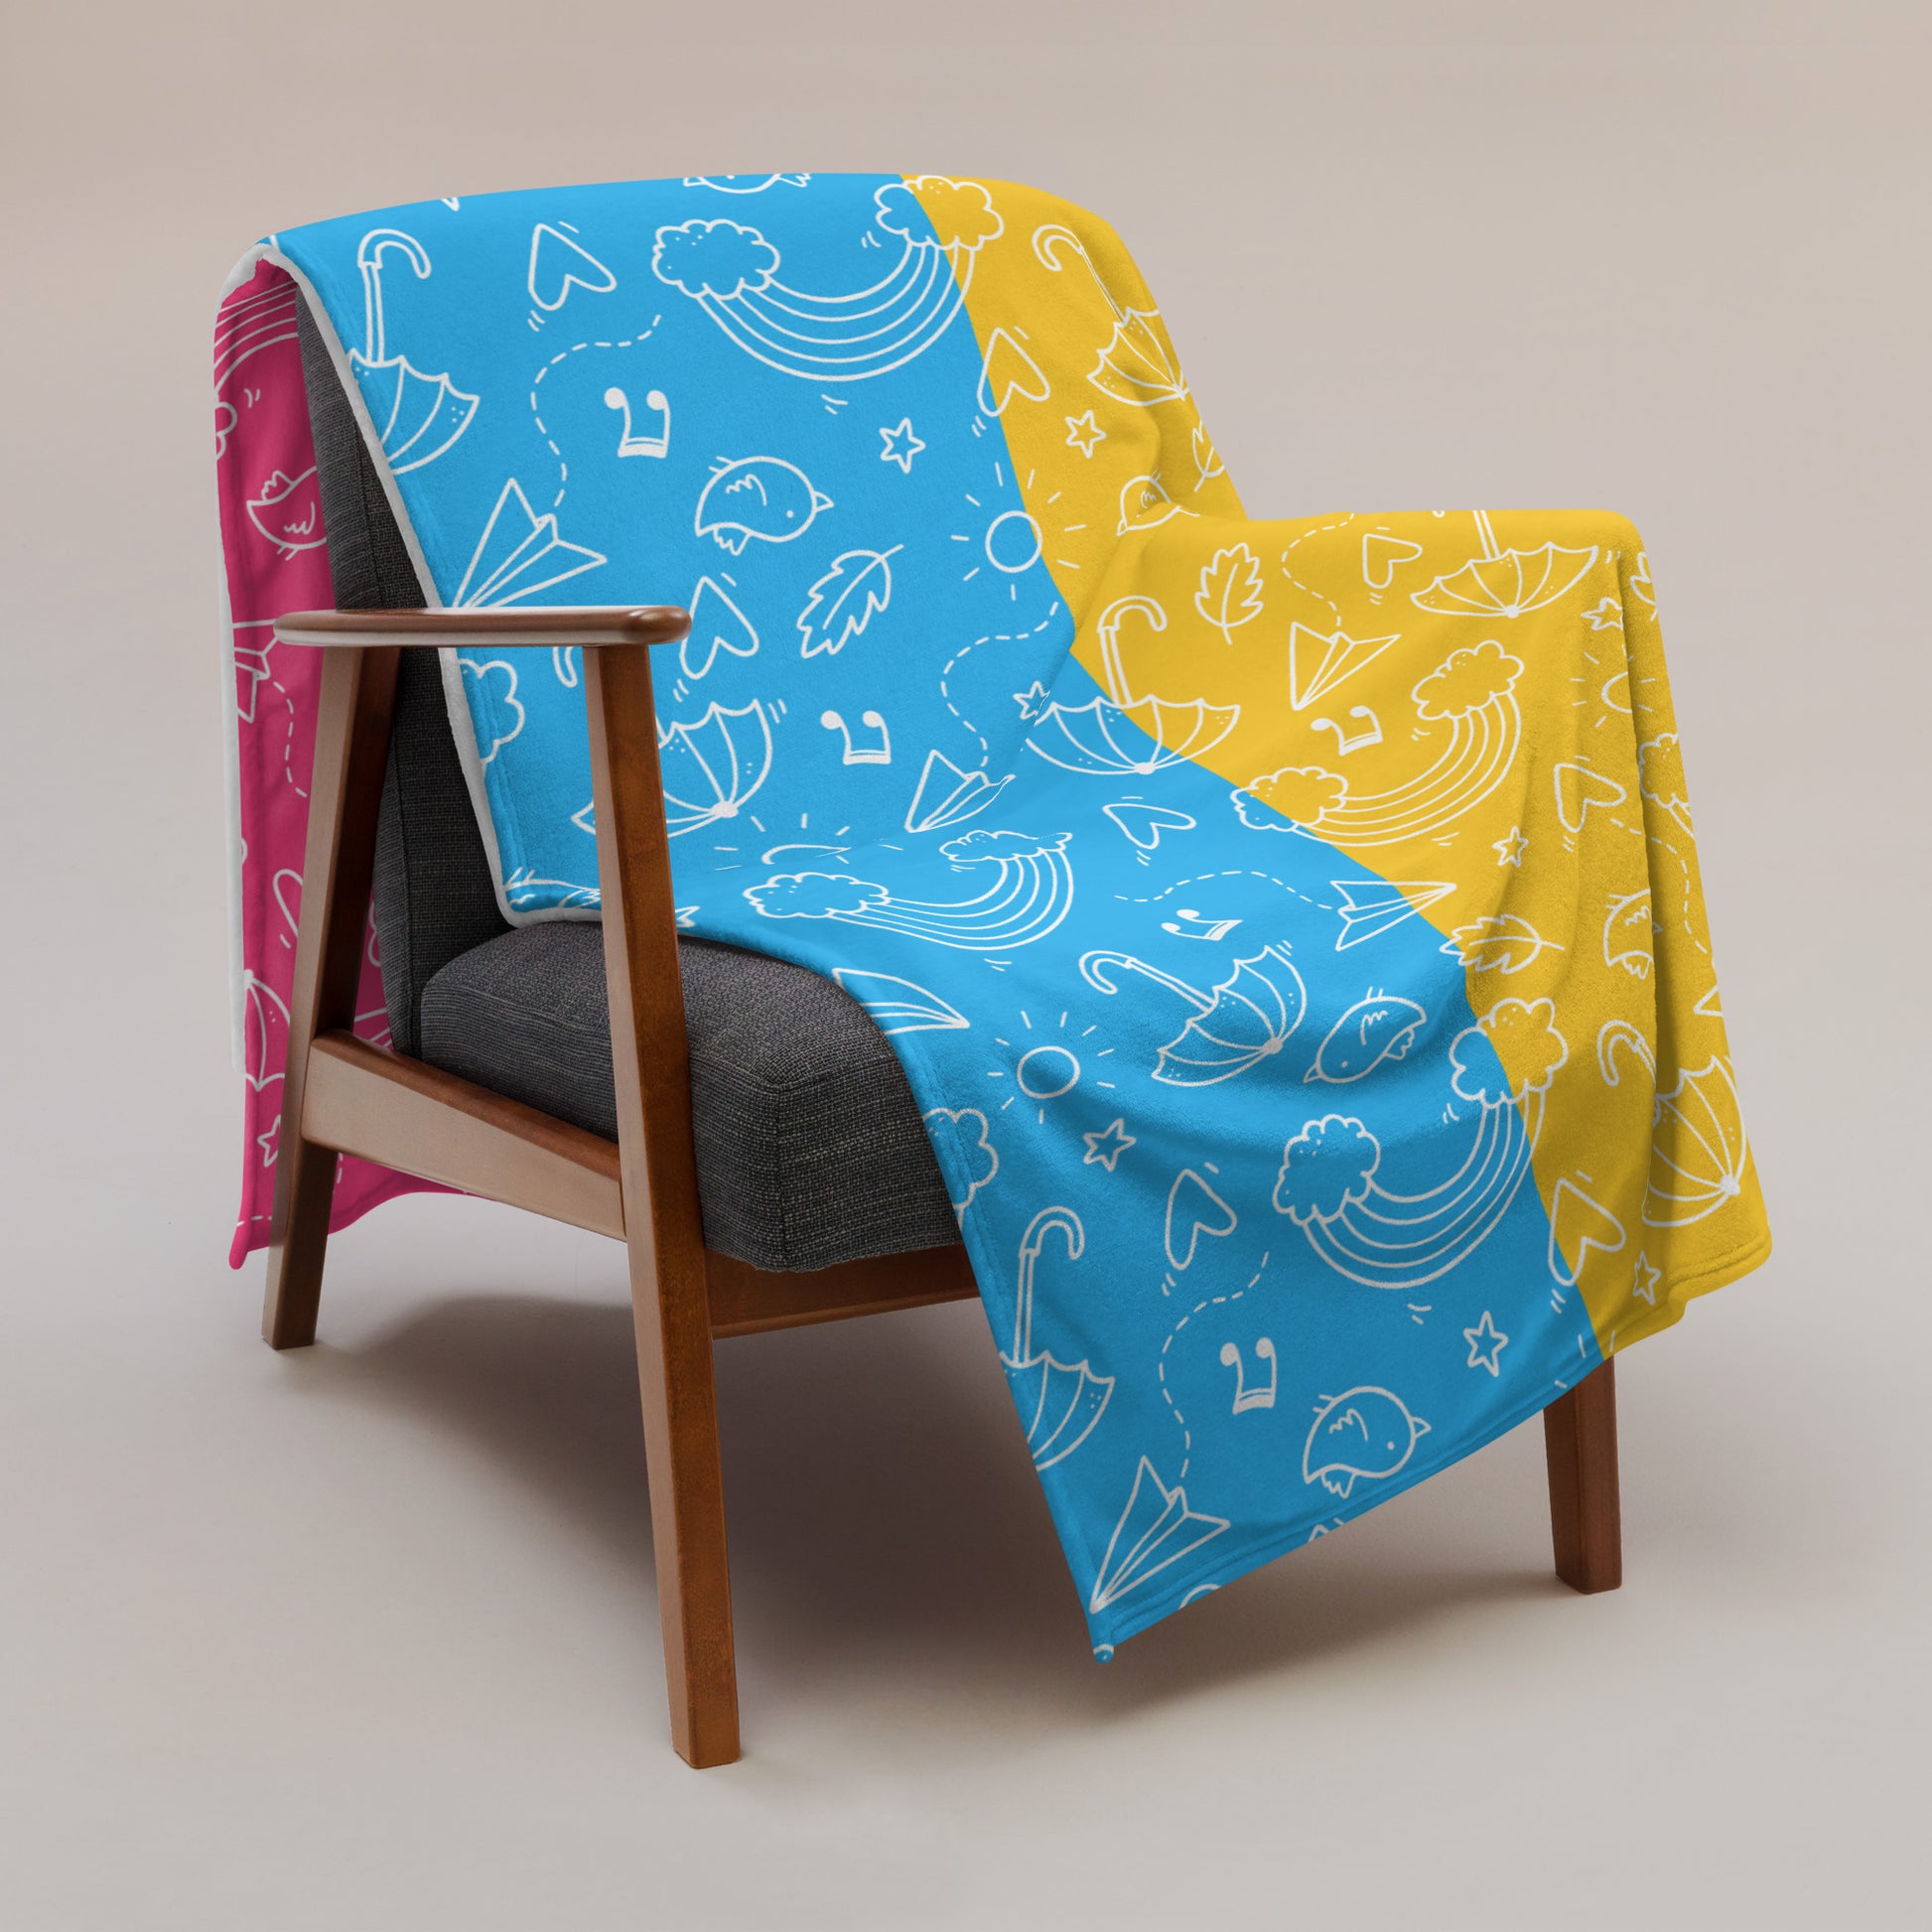 Soft throw blanket hanging over an armchair. Pansexual pride flag colors with cute lgbtq doodle print